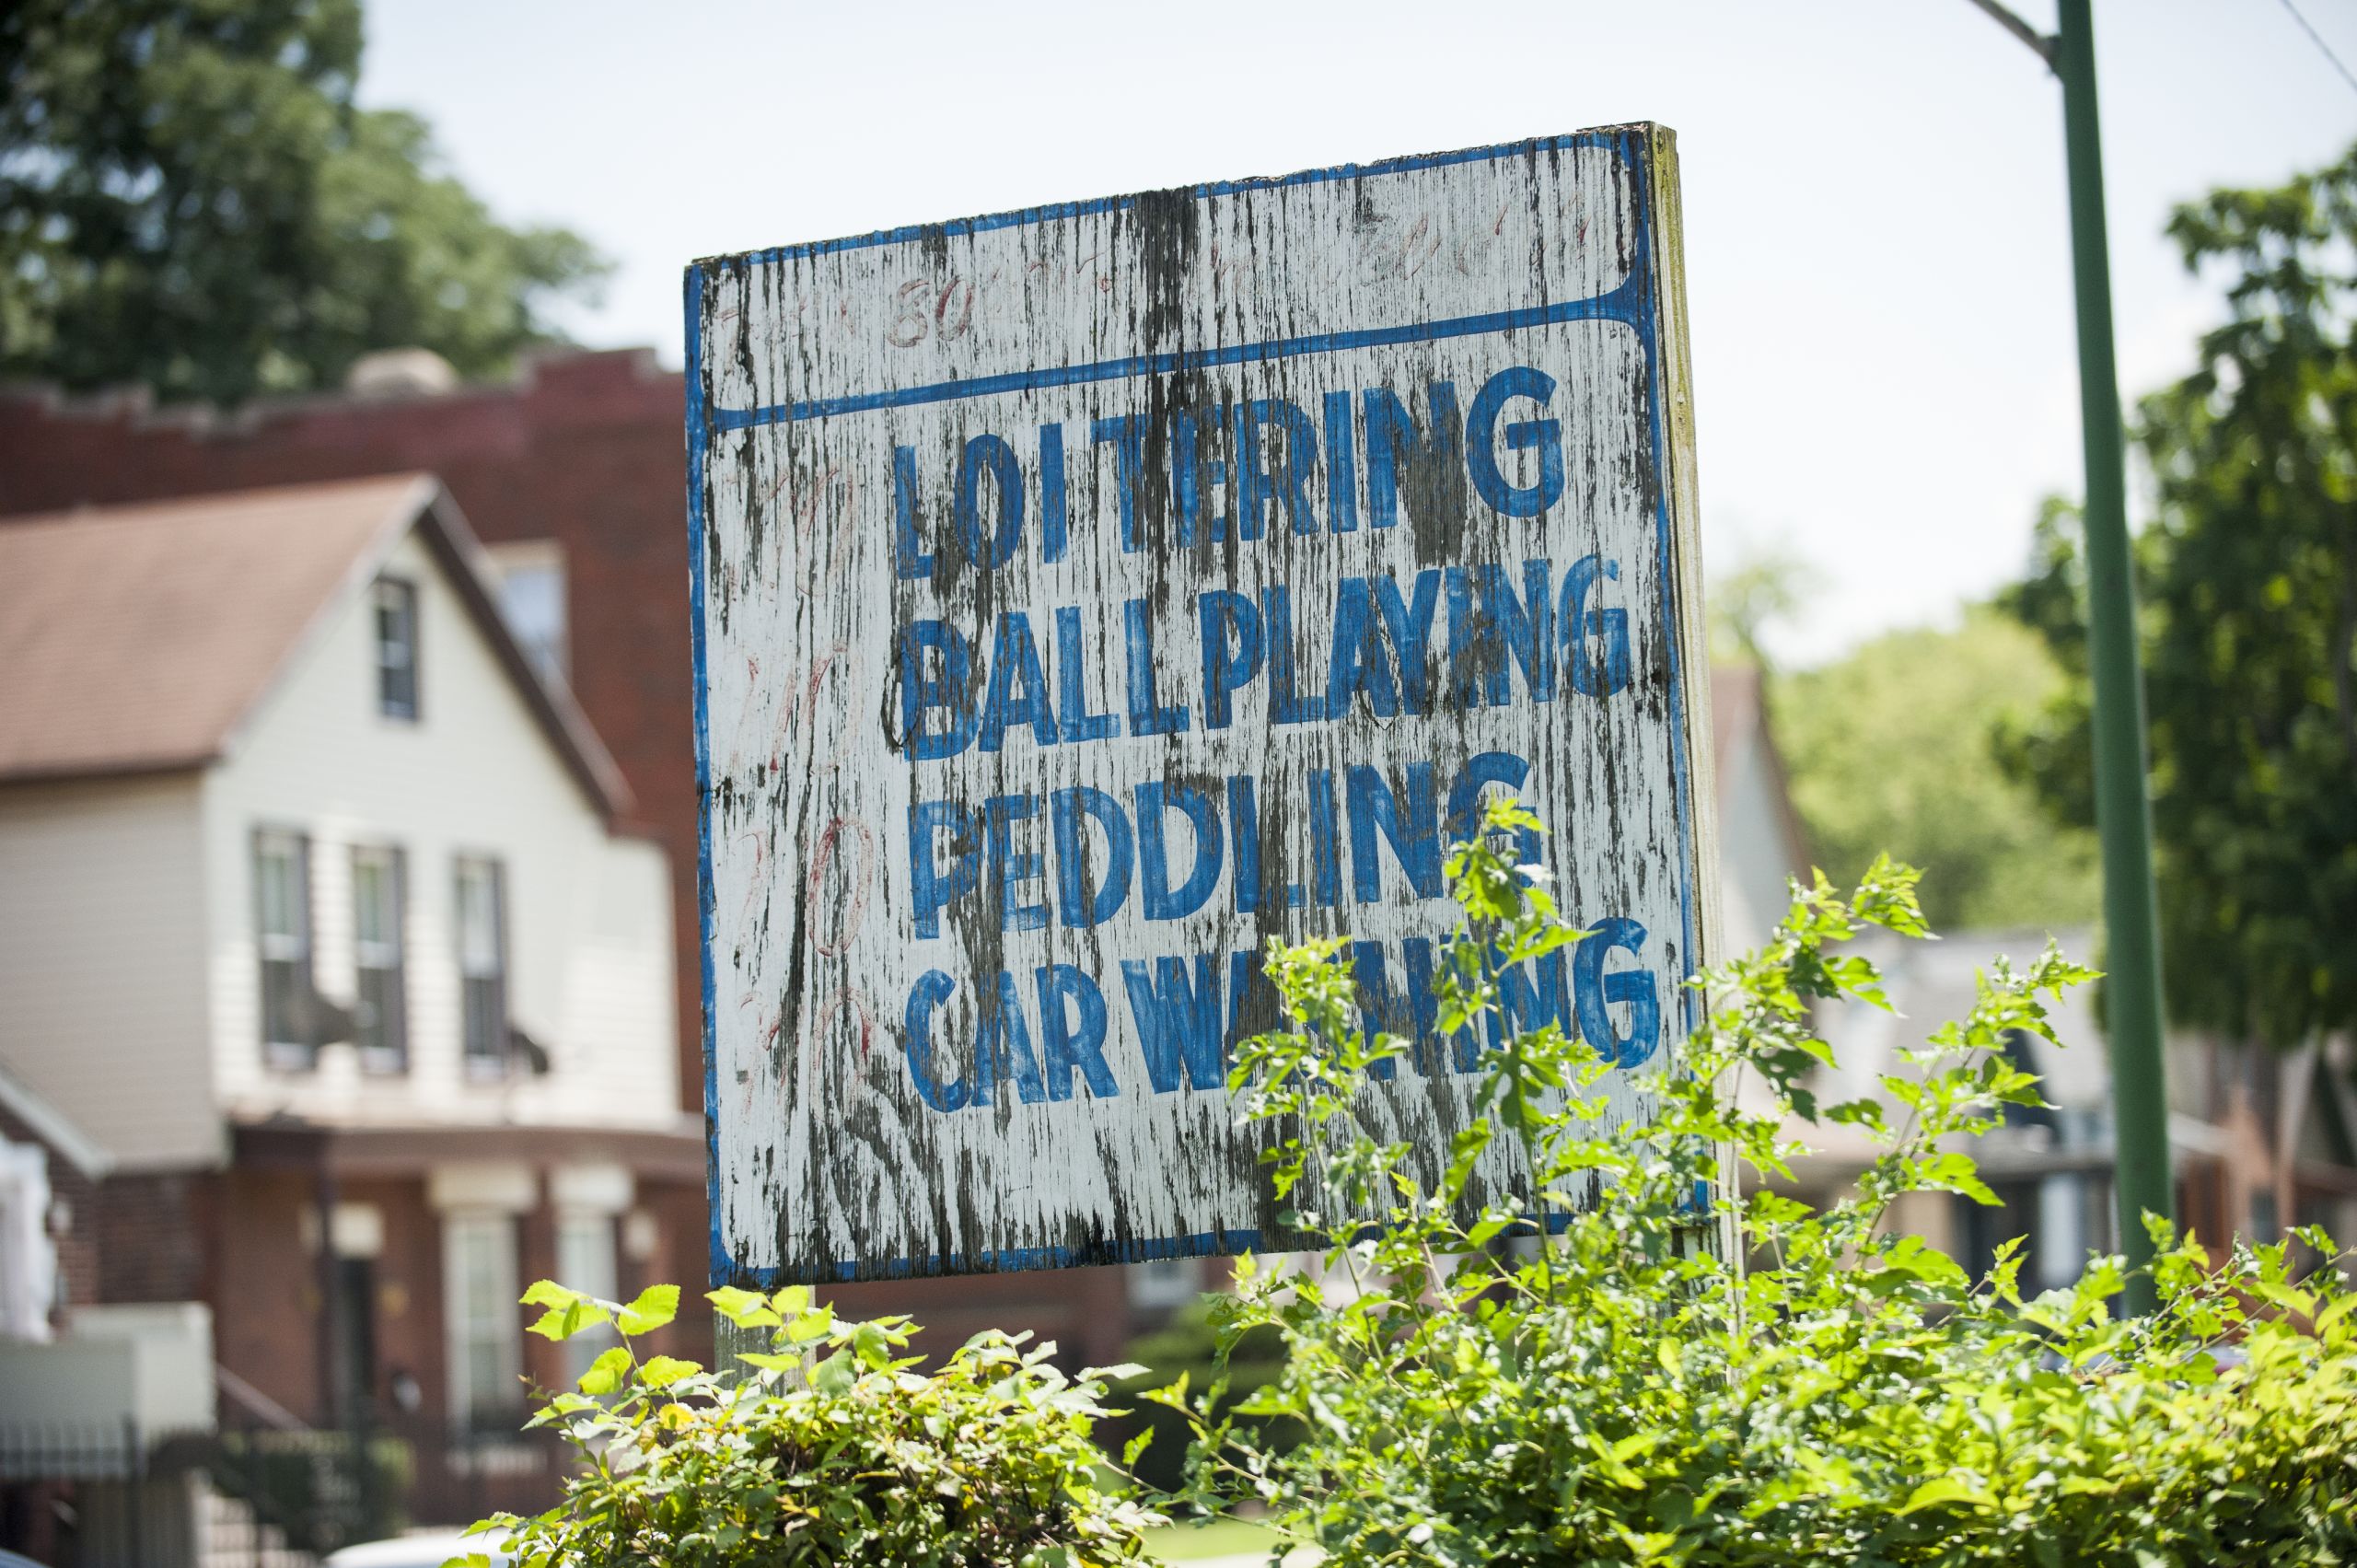 A wooden sign with fading paint reads "Loitering, Ball Playing, Peddling, Car Washing"